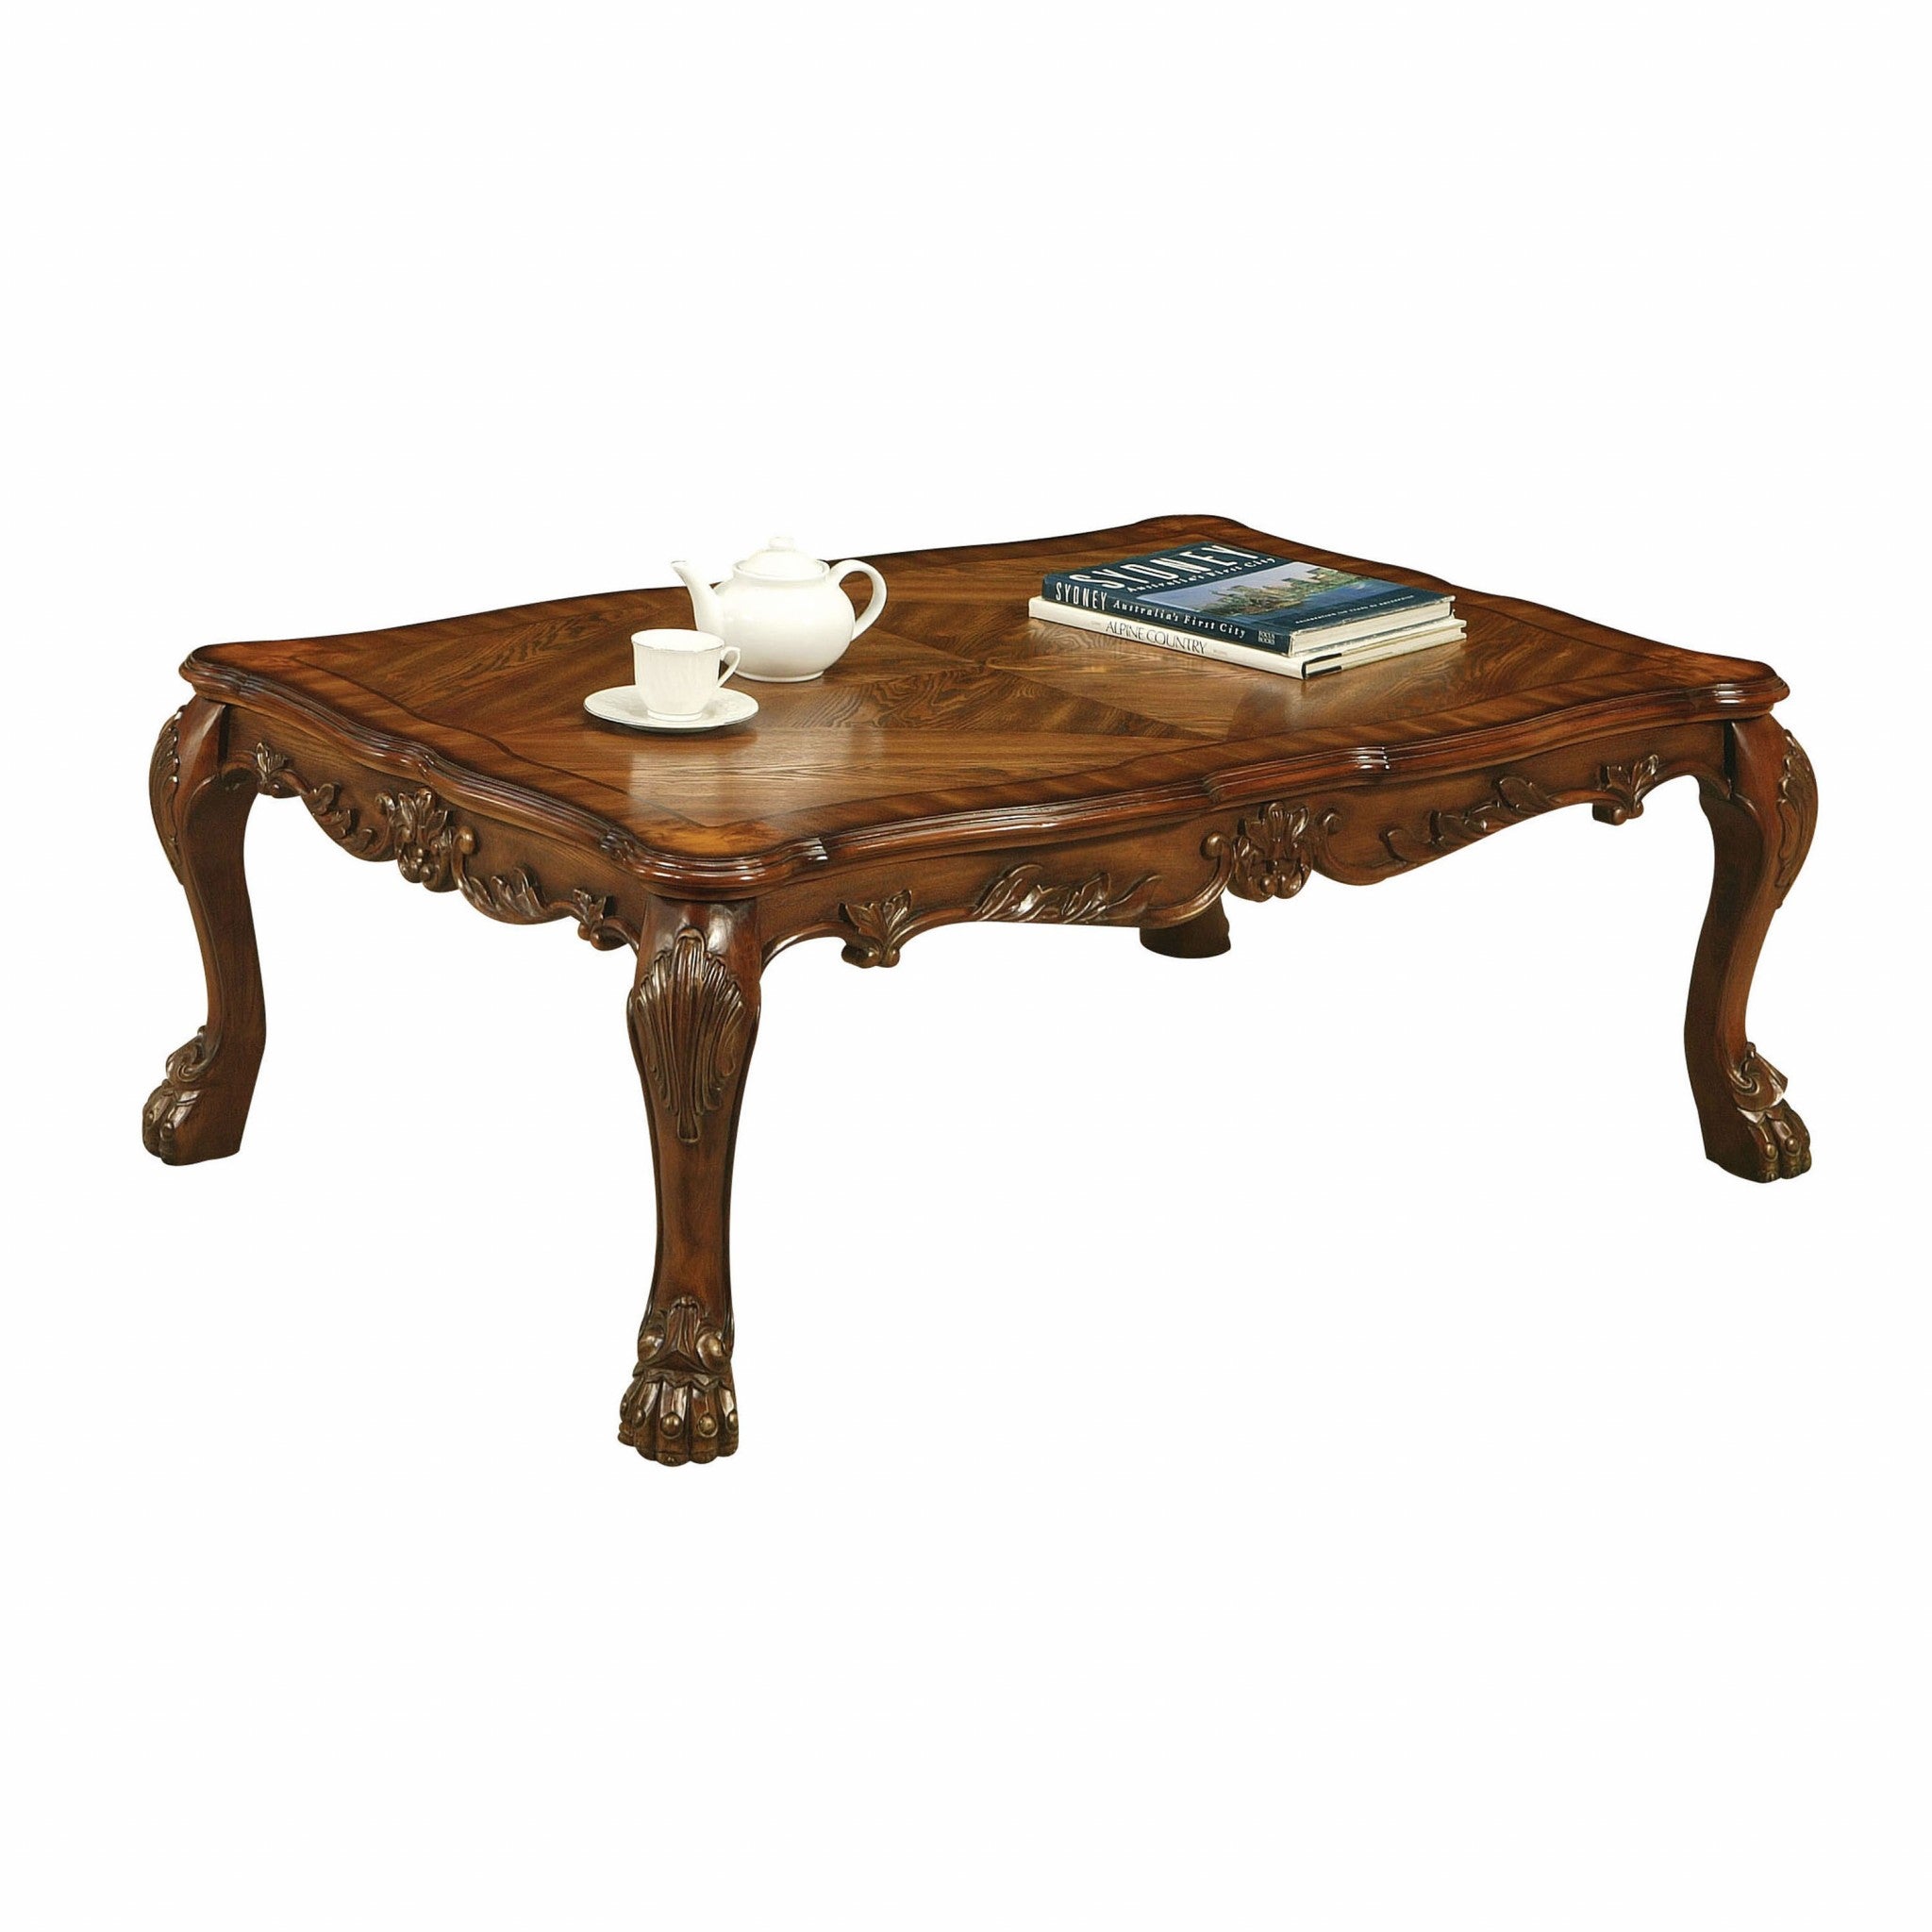 54" Brown Solid Wood Coffee Table